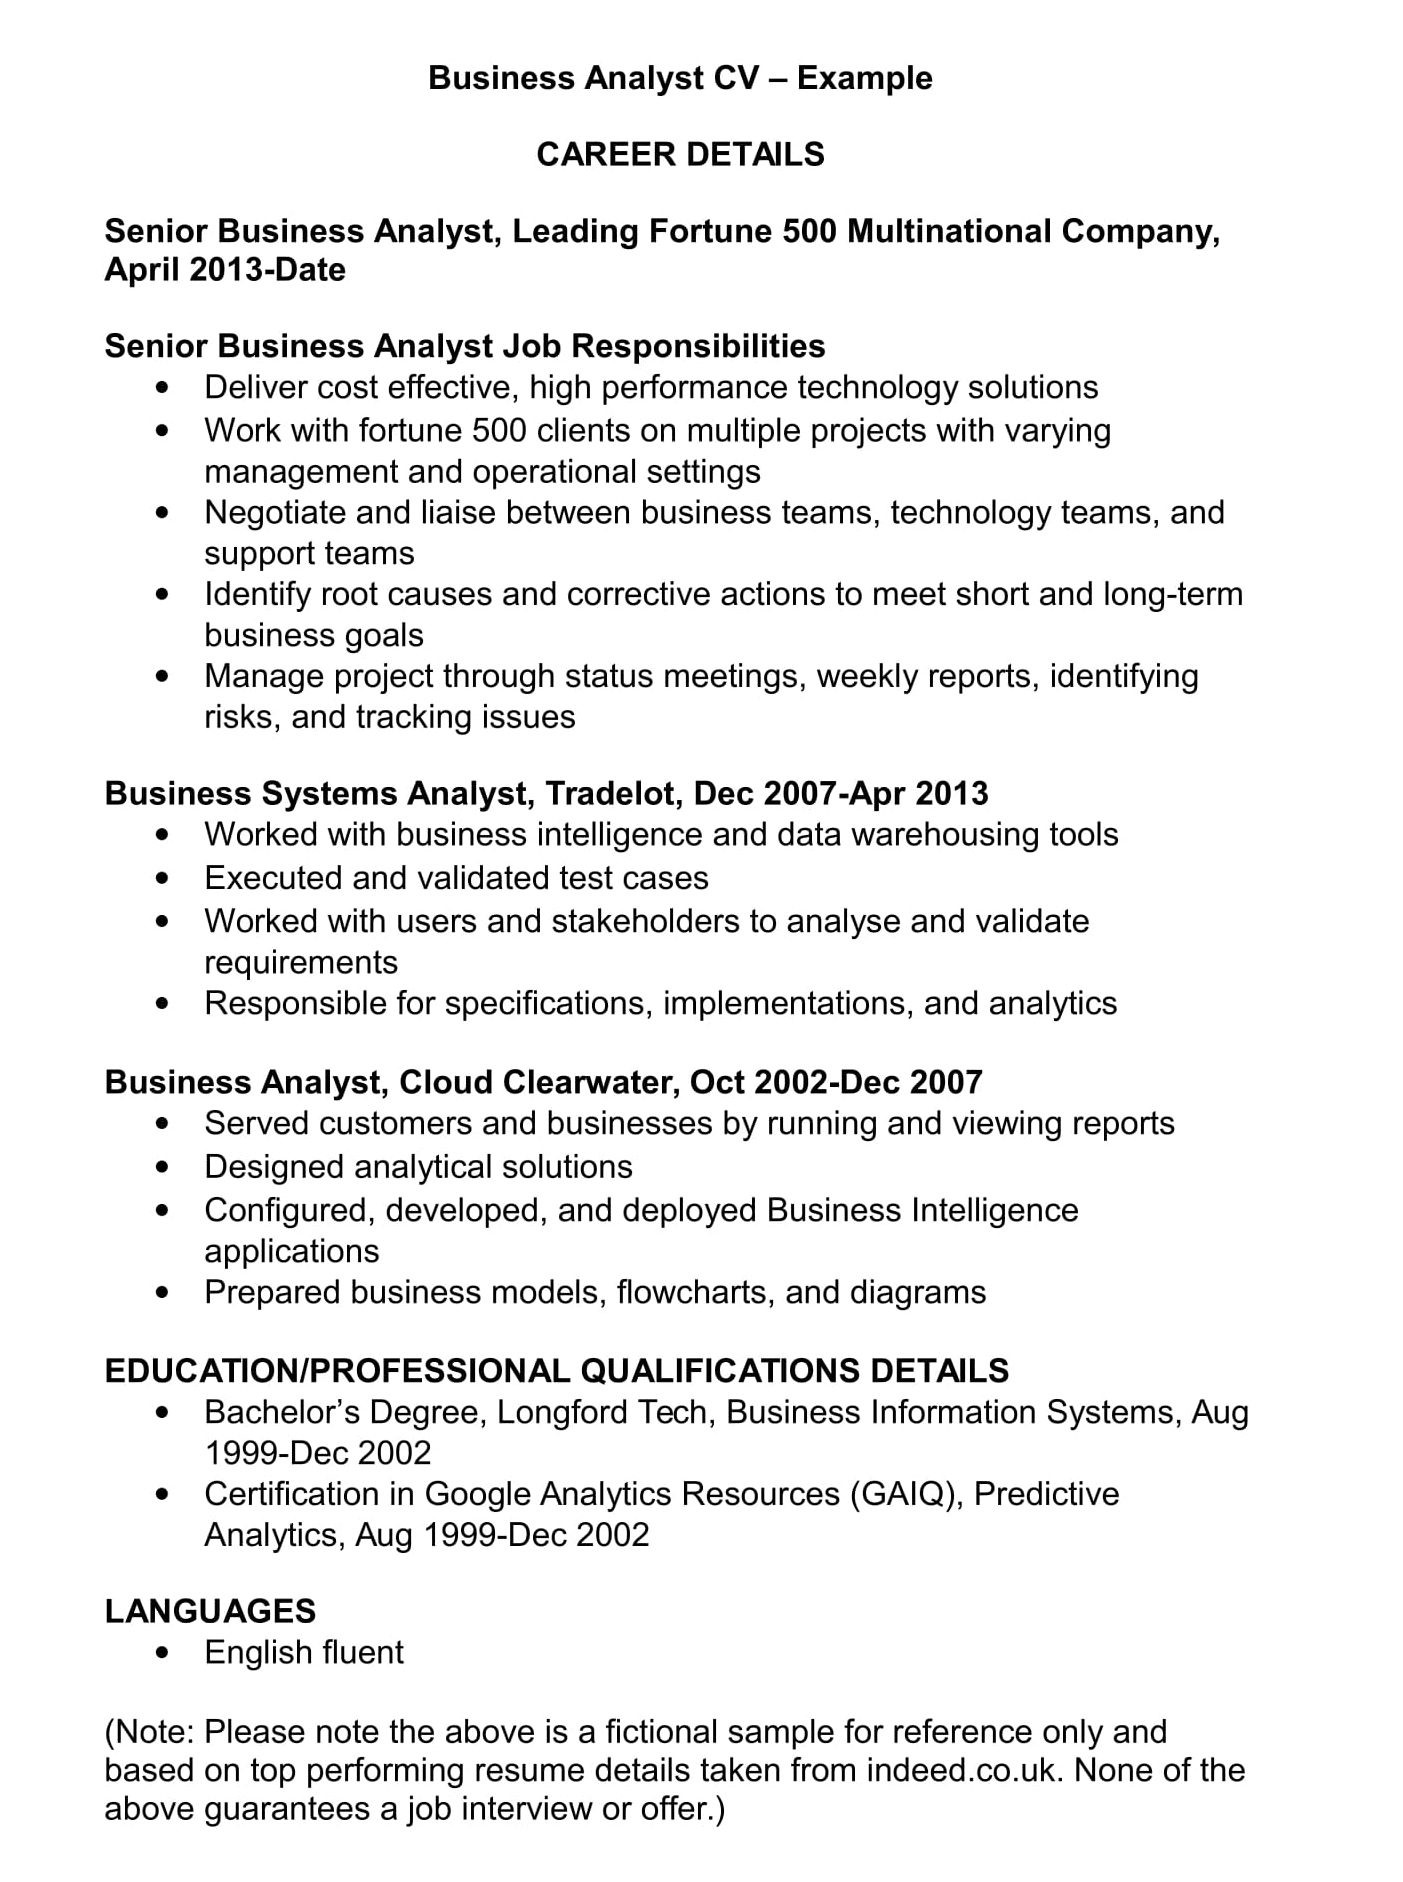 Sample Resume for Business Analyst In Banking Domain Business Analyst Cv, Template and Examples Audit Finance Management